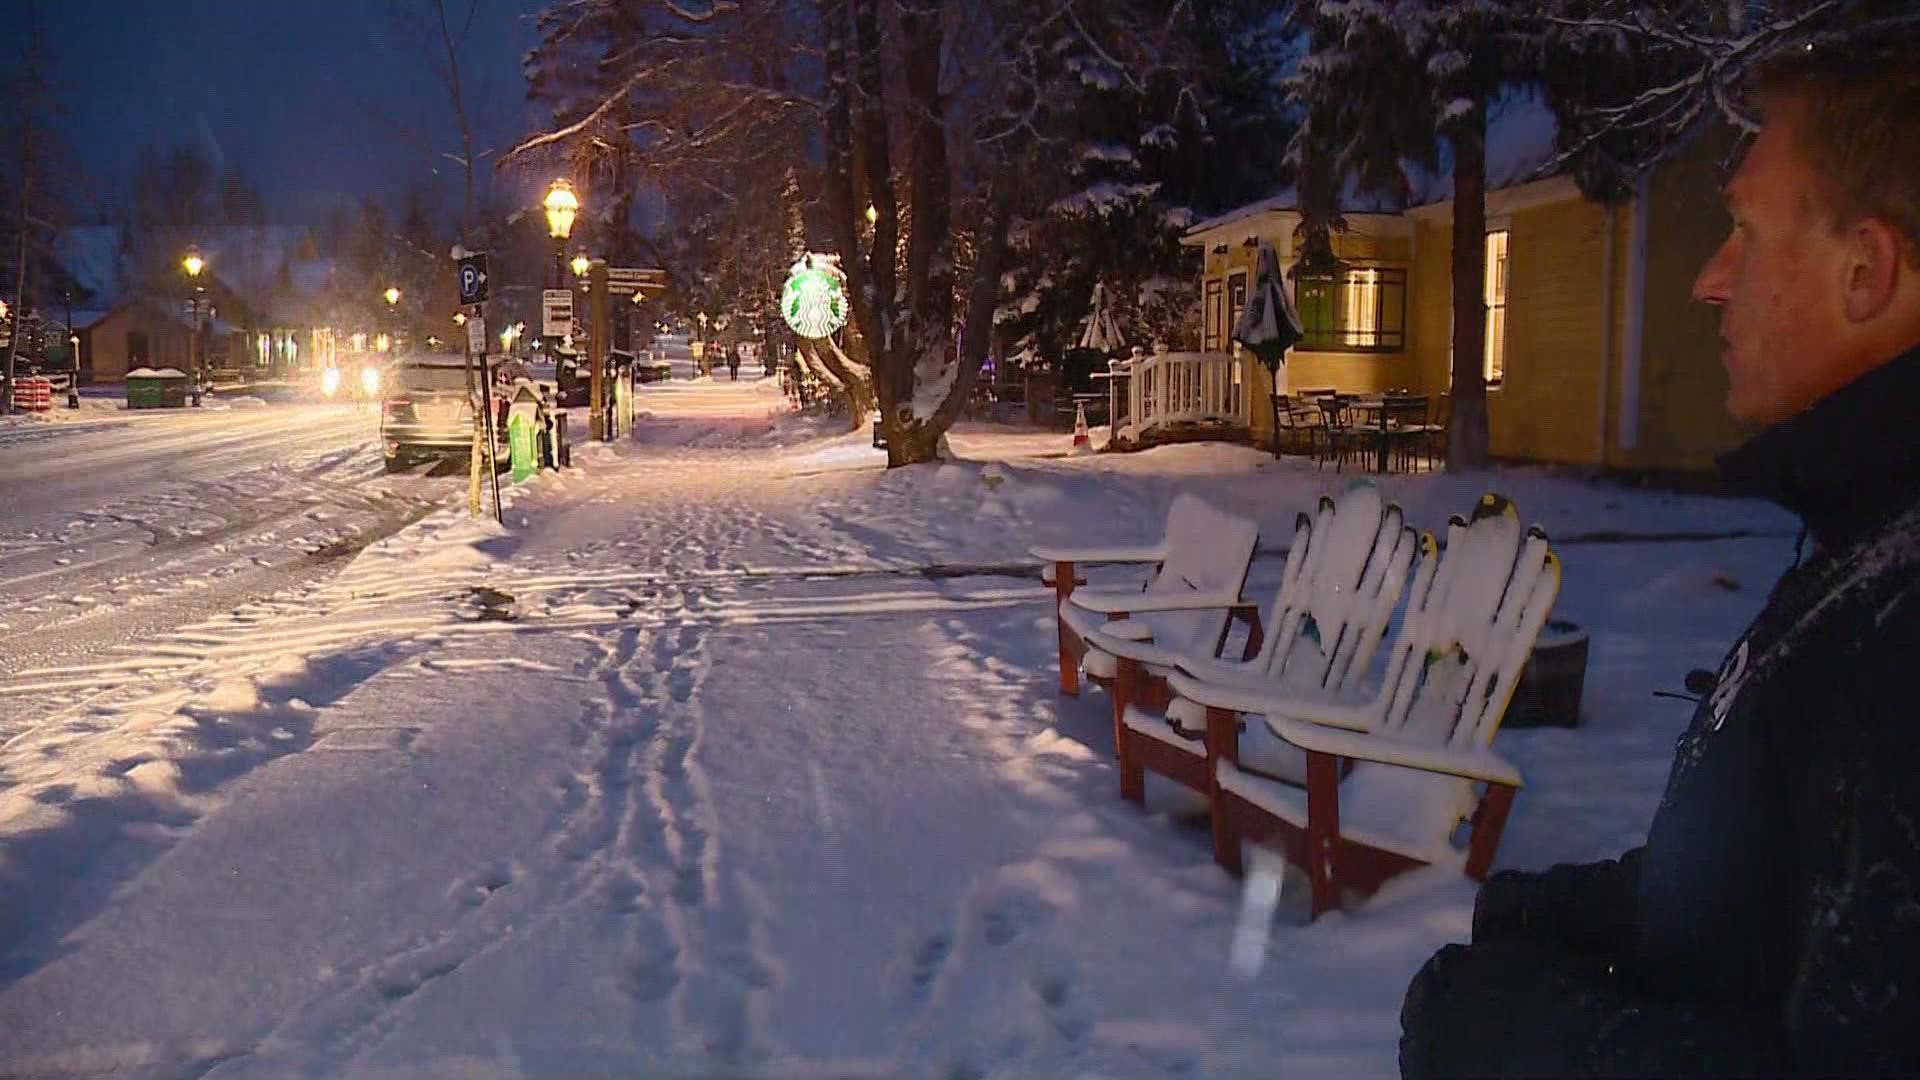 Matt Renoux has a look at conditions in Breckenridge on Thursday morning after another round of snow fell overnight.